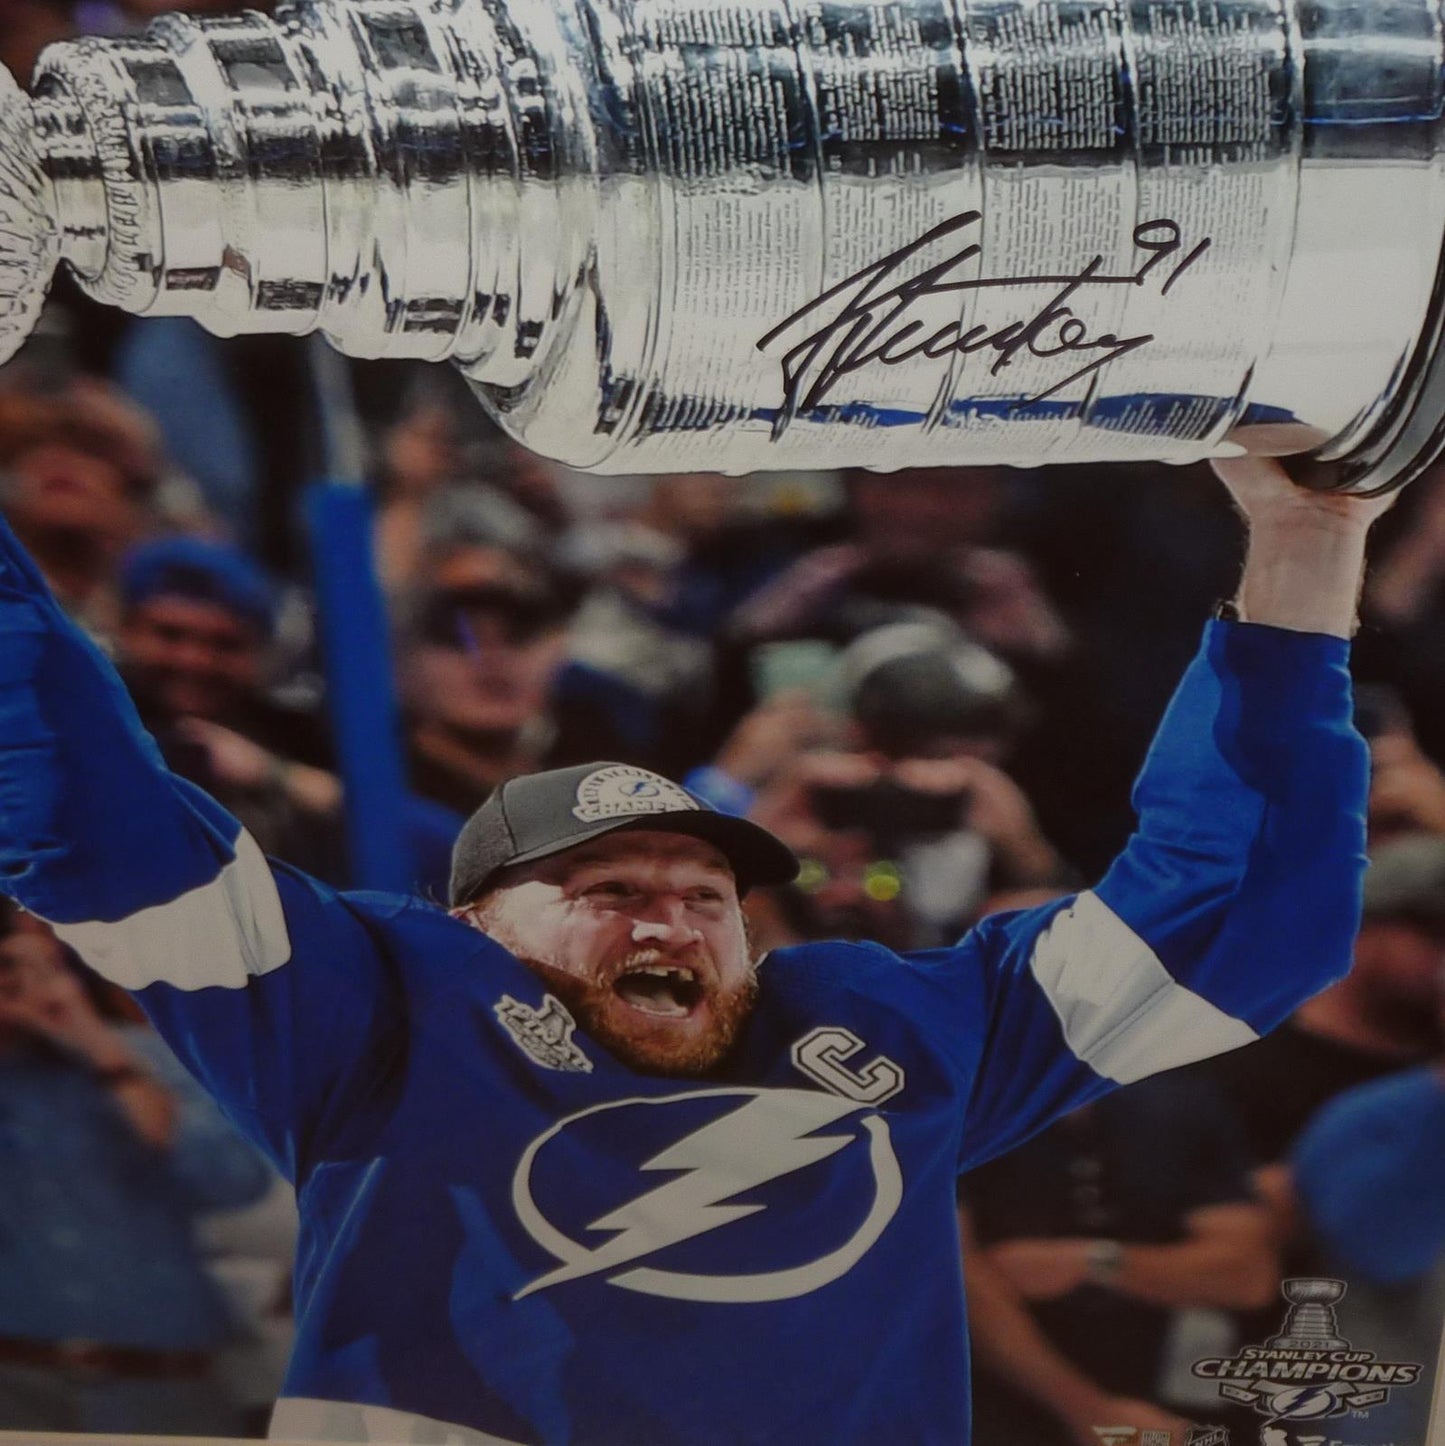 Steven Stamkos Autographed Tampa Bay Lightning (Stanley Cup Trophy) Deluxe Framed 16x20 Photo - Fanatics